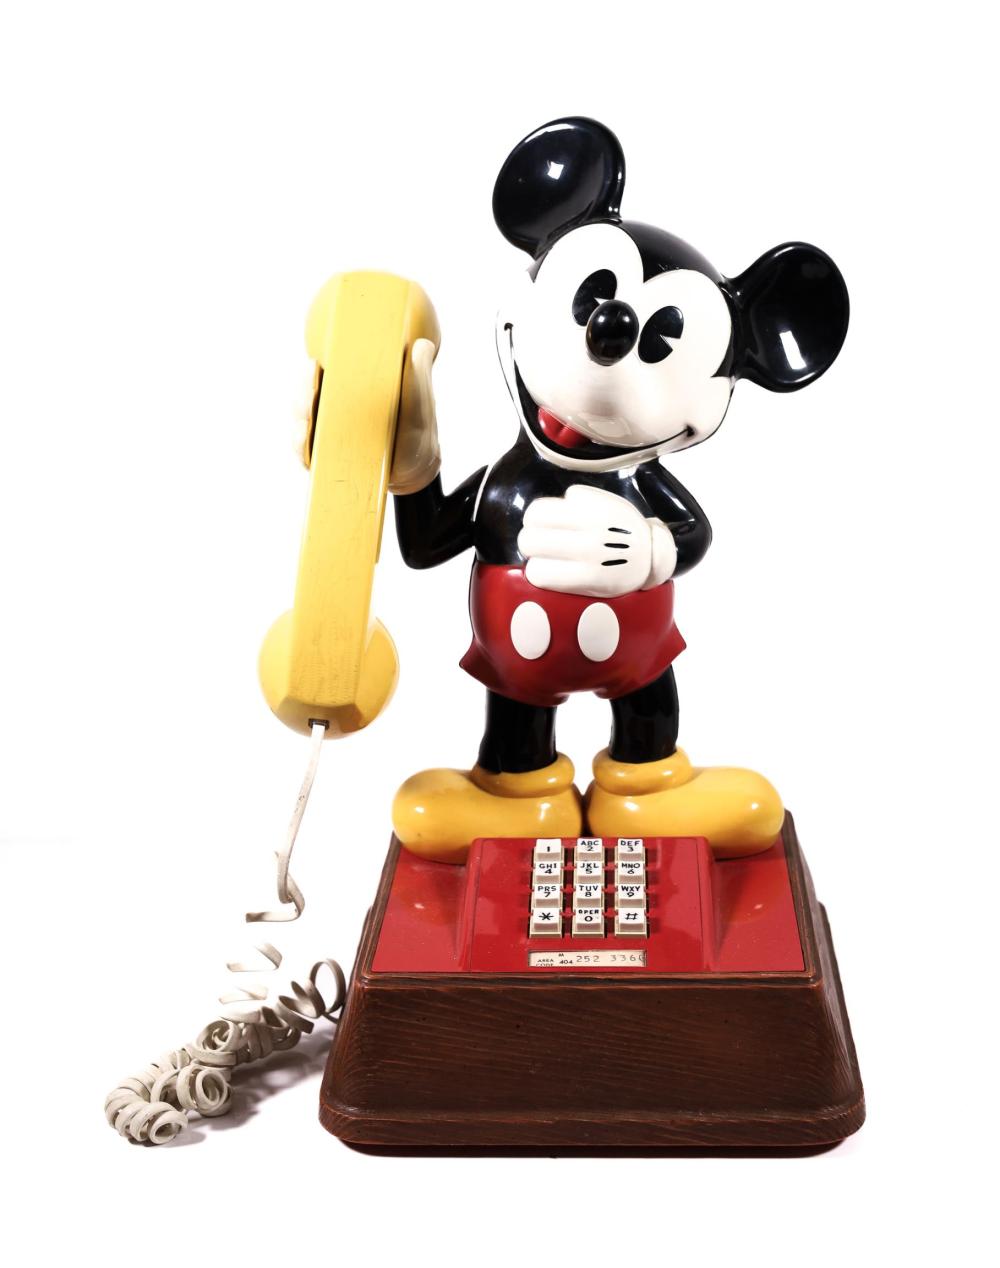 THE MICKEY MOUSE PHONE 1976 RETRO 300547